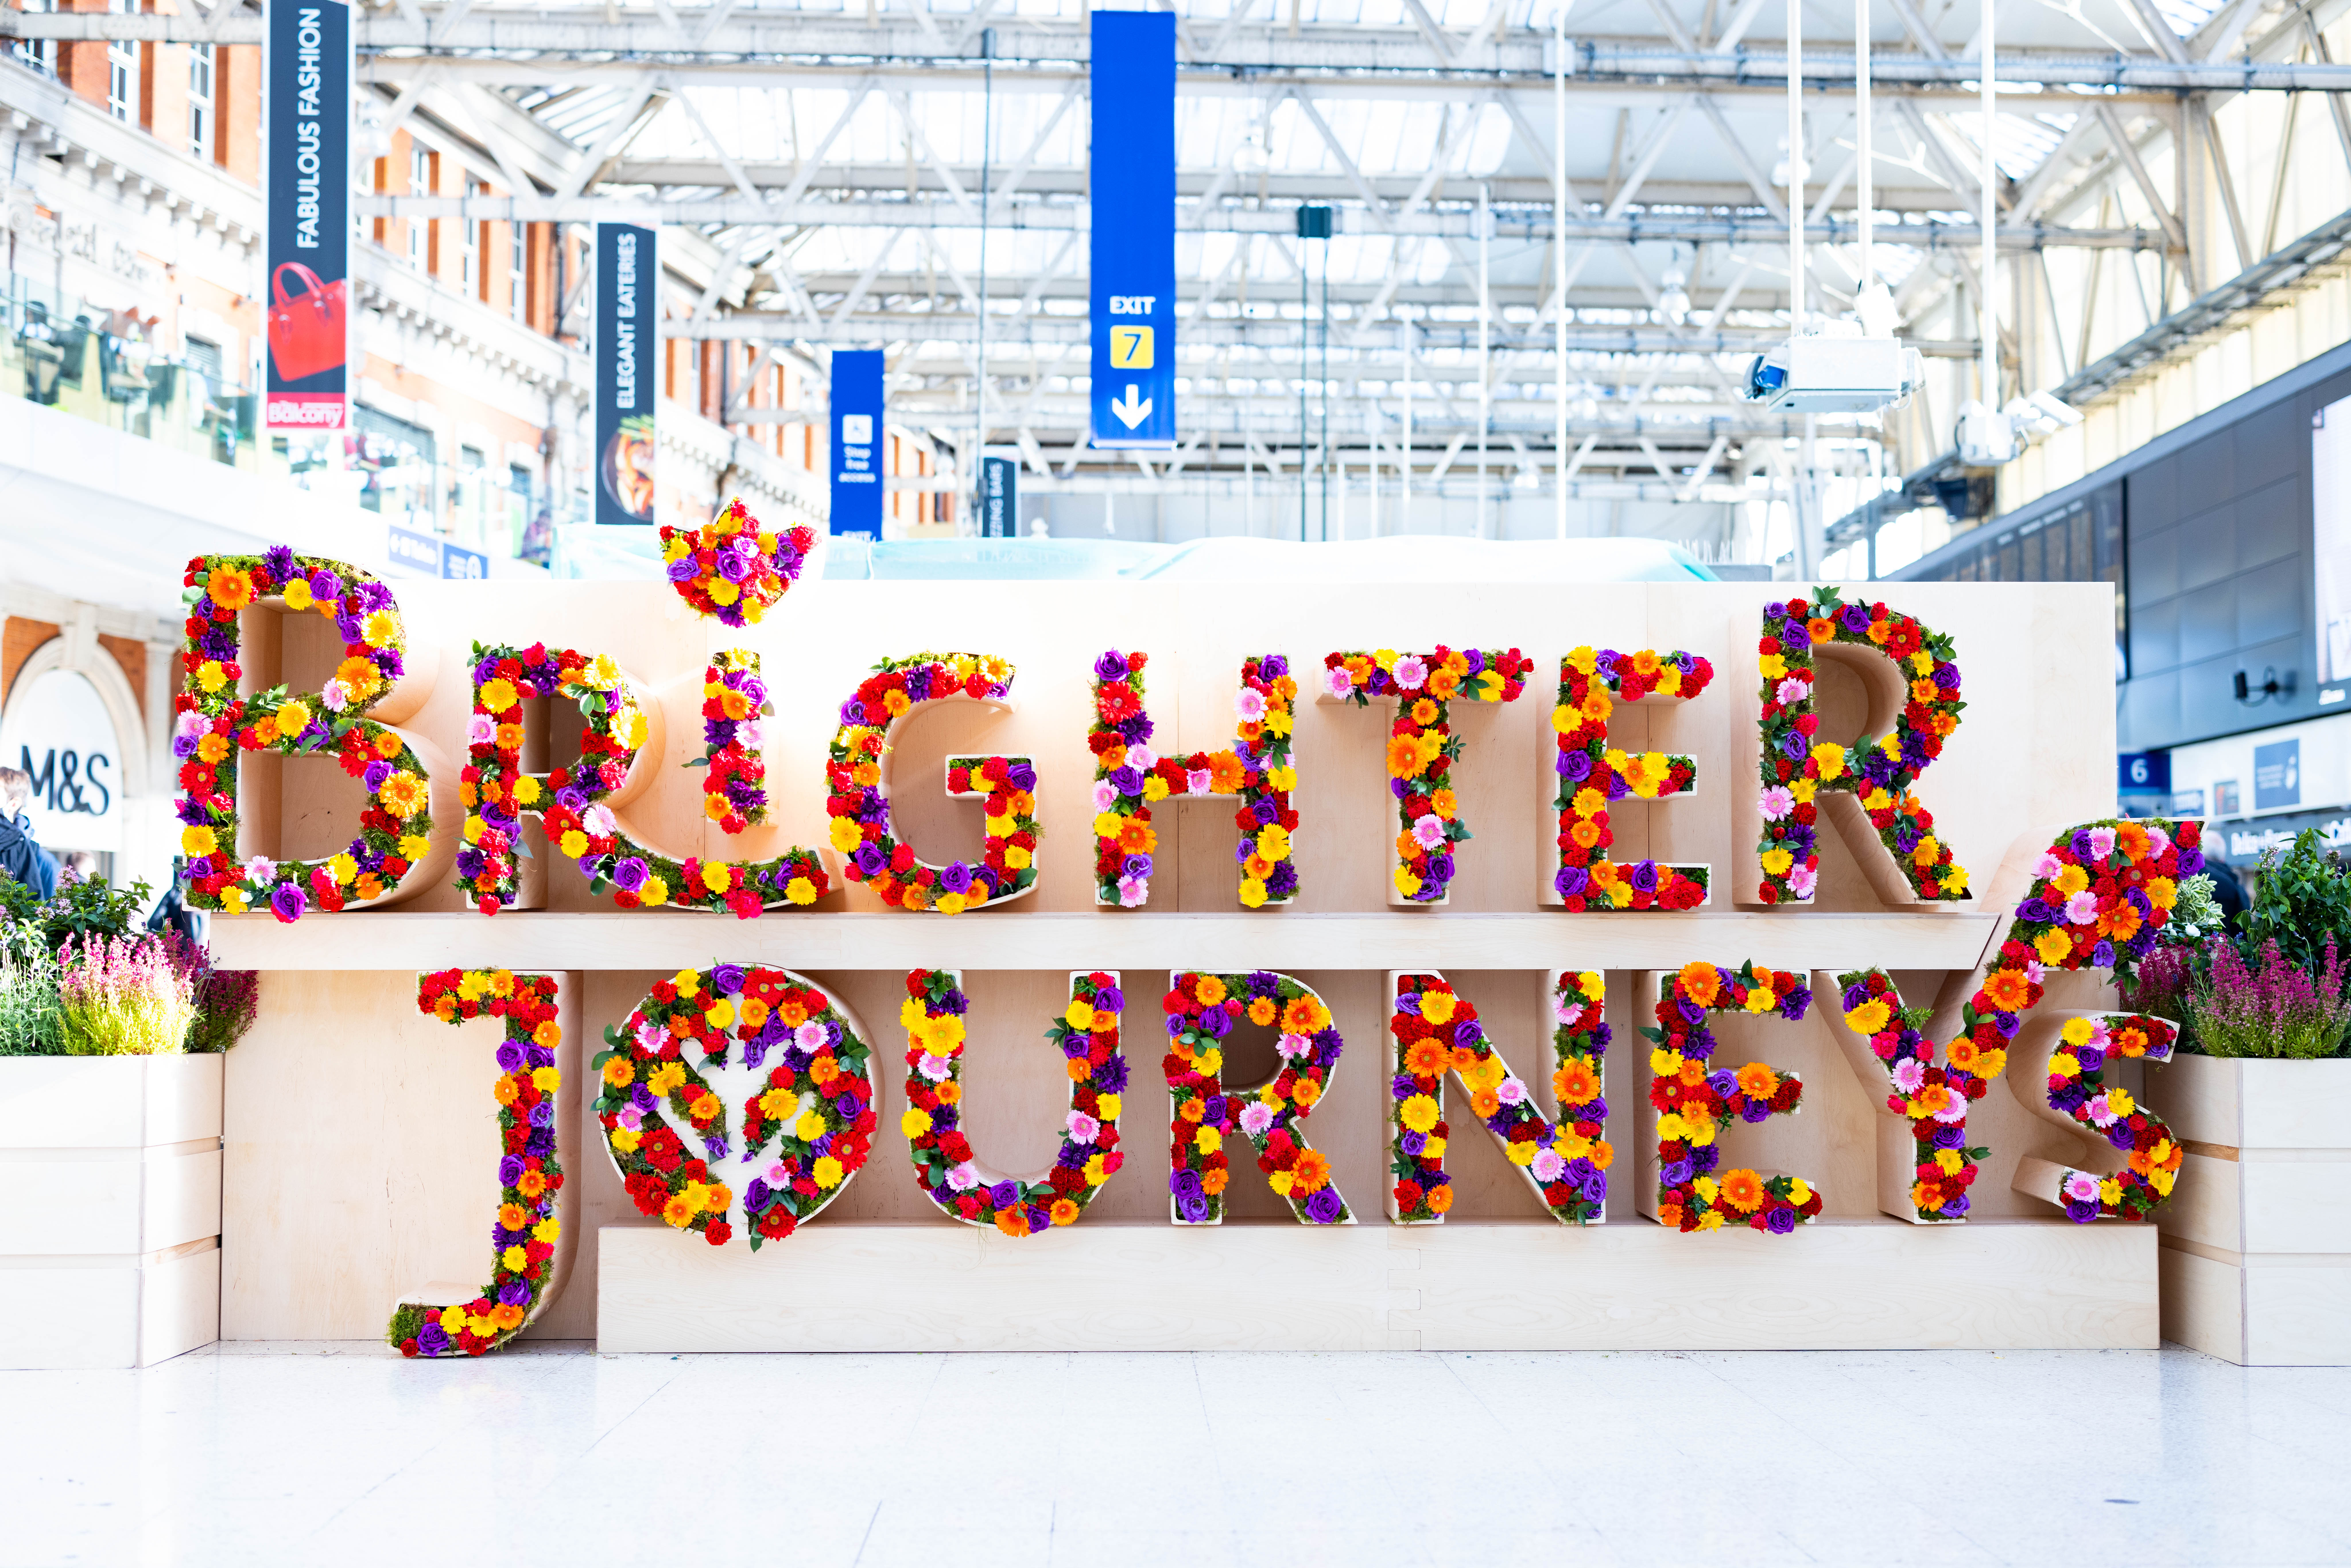 Brighter Journeys in bloom at stations